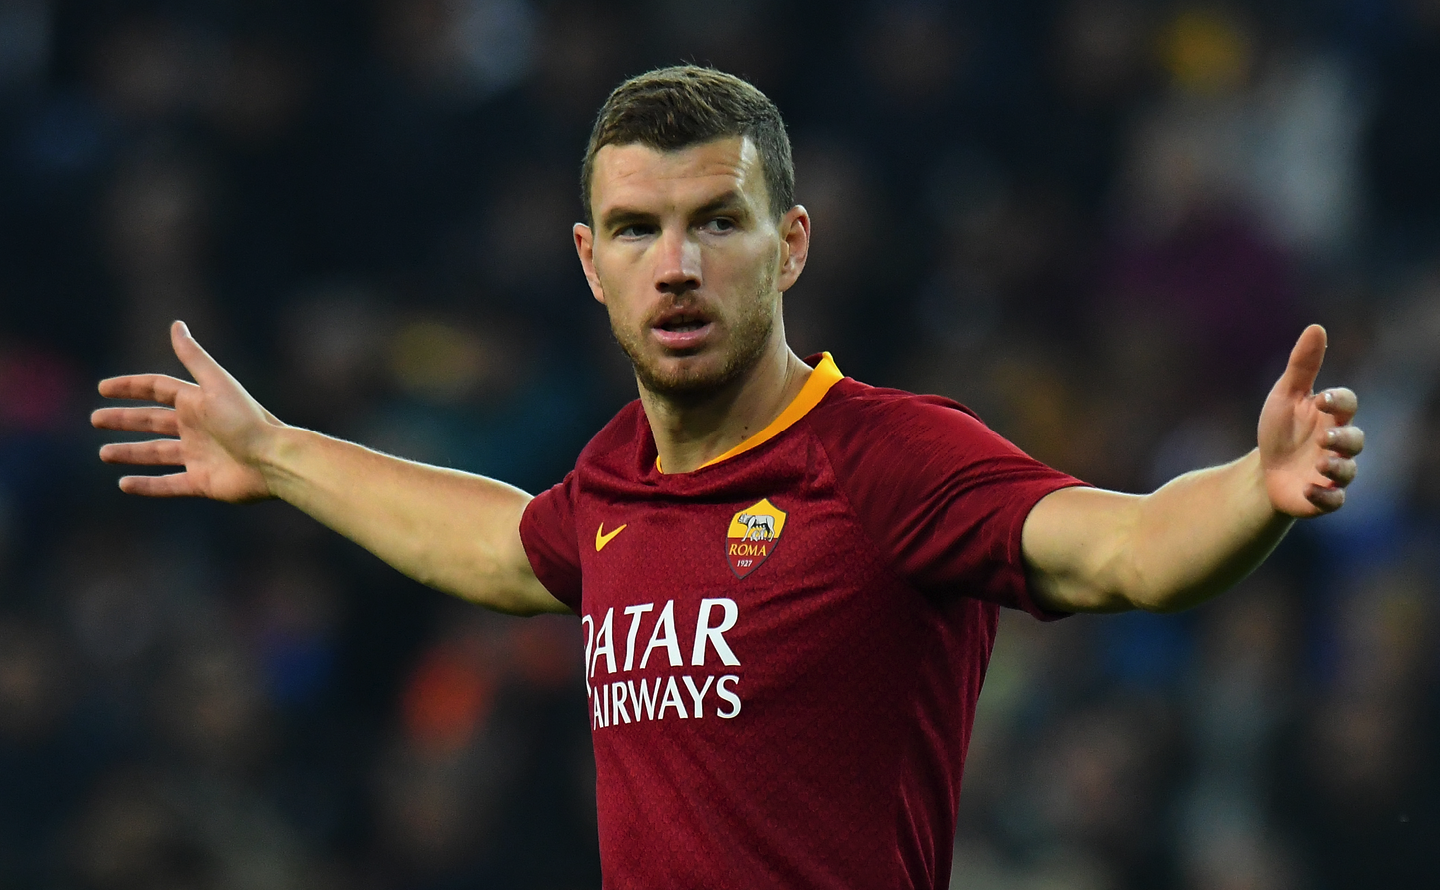 Once they terminated Gonzalo Higuain’s contract it was clear that Juventus would look for a replacement: Roma's Edin Dzeko is at the top of their list